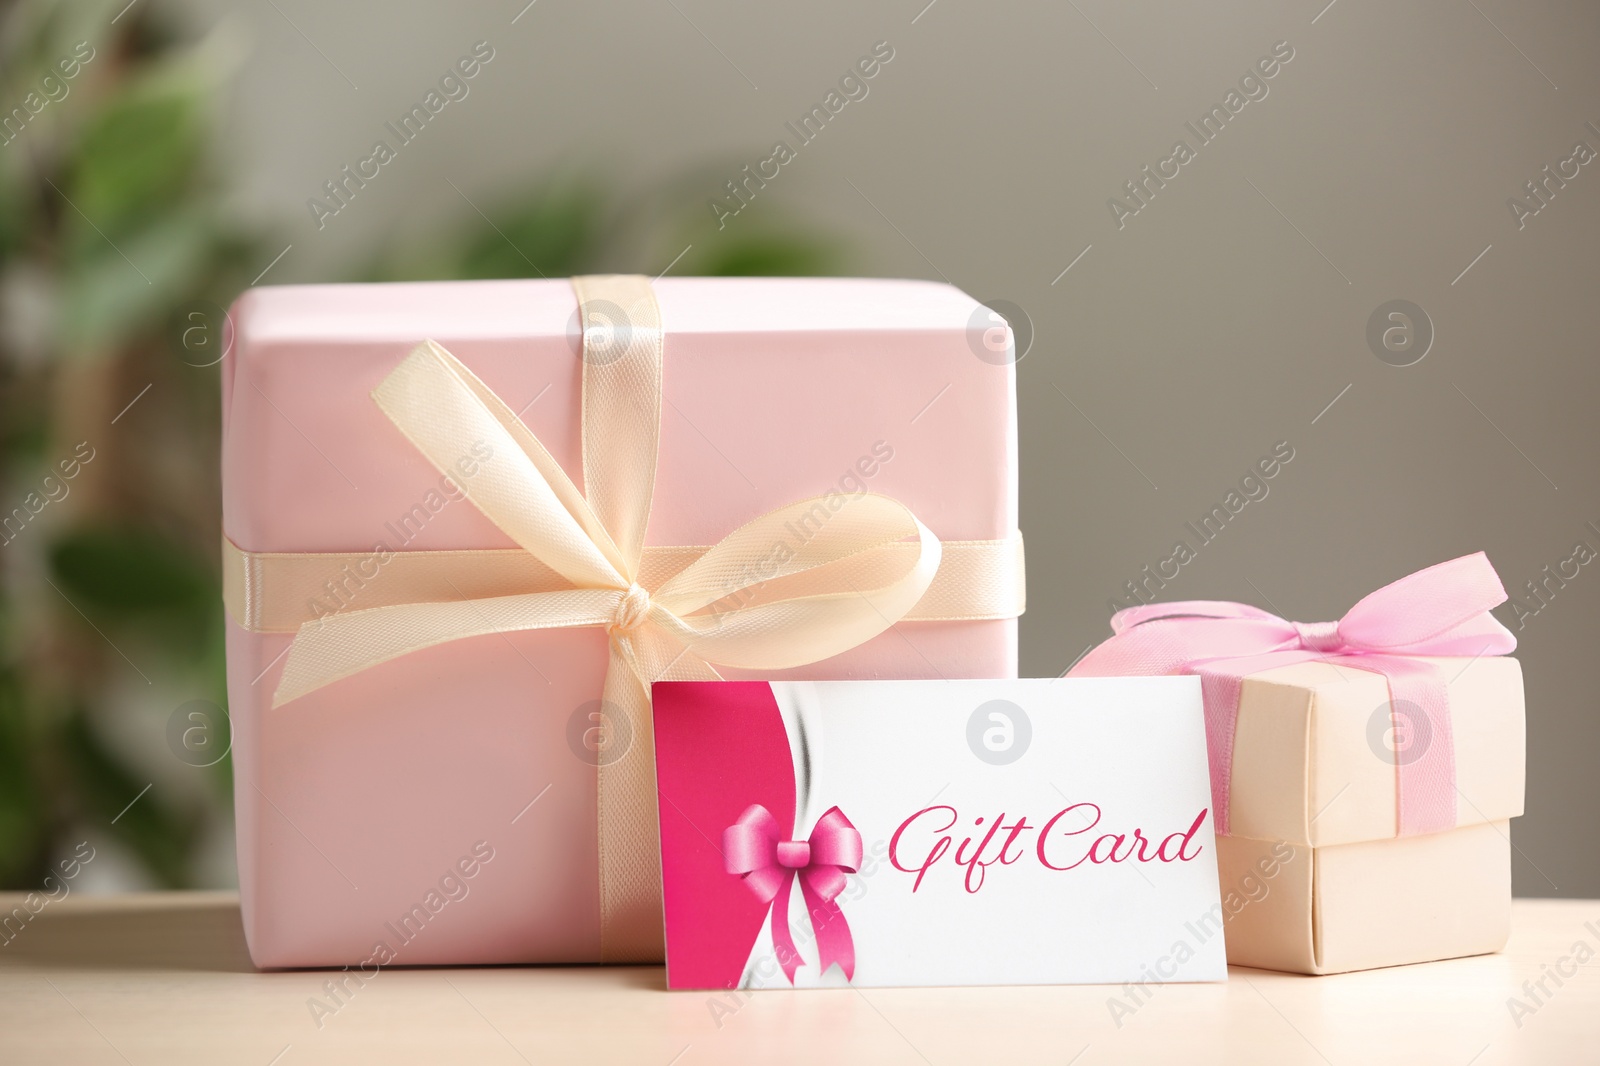 Photo of Gift card and present on table against blurred background